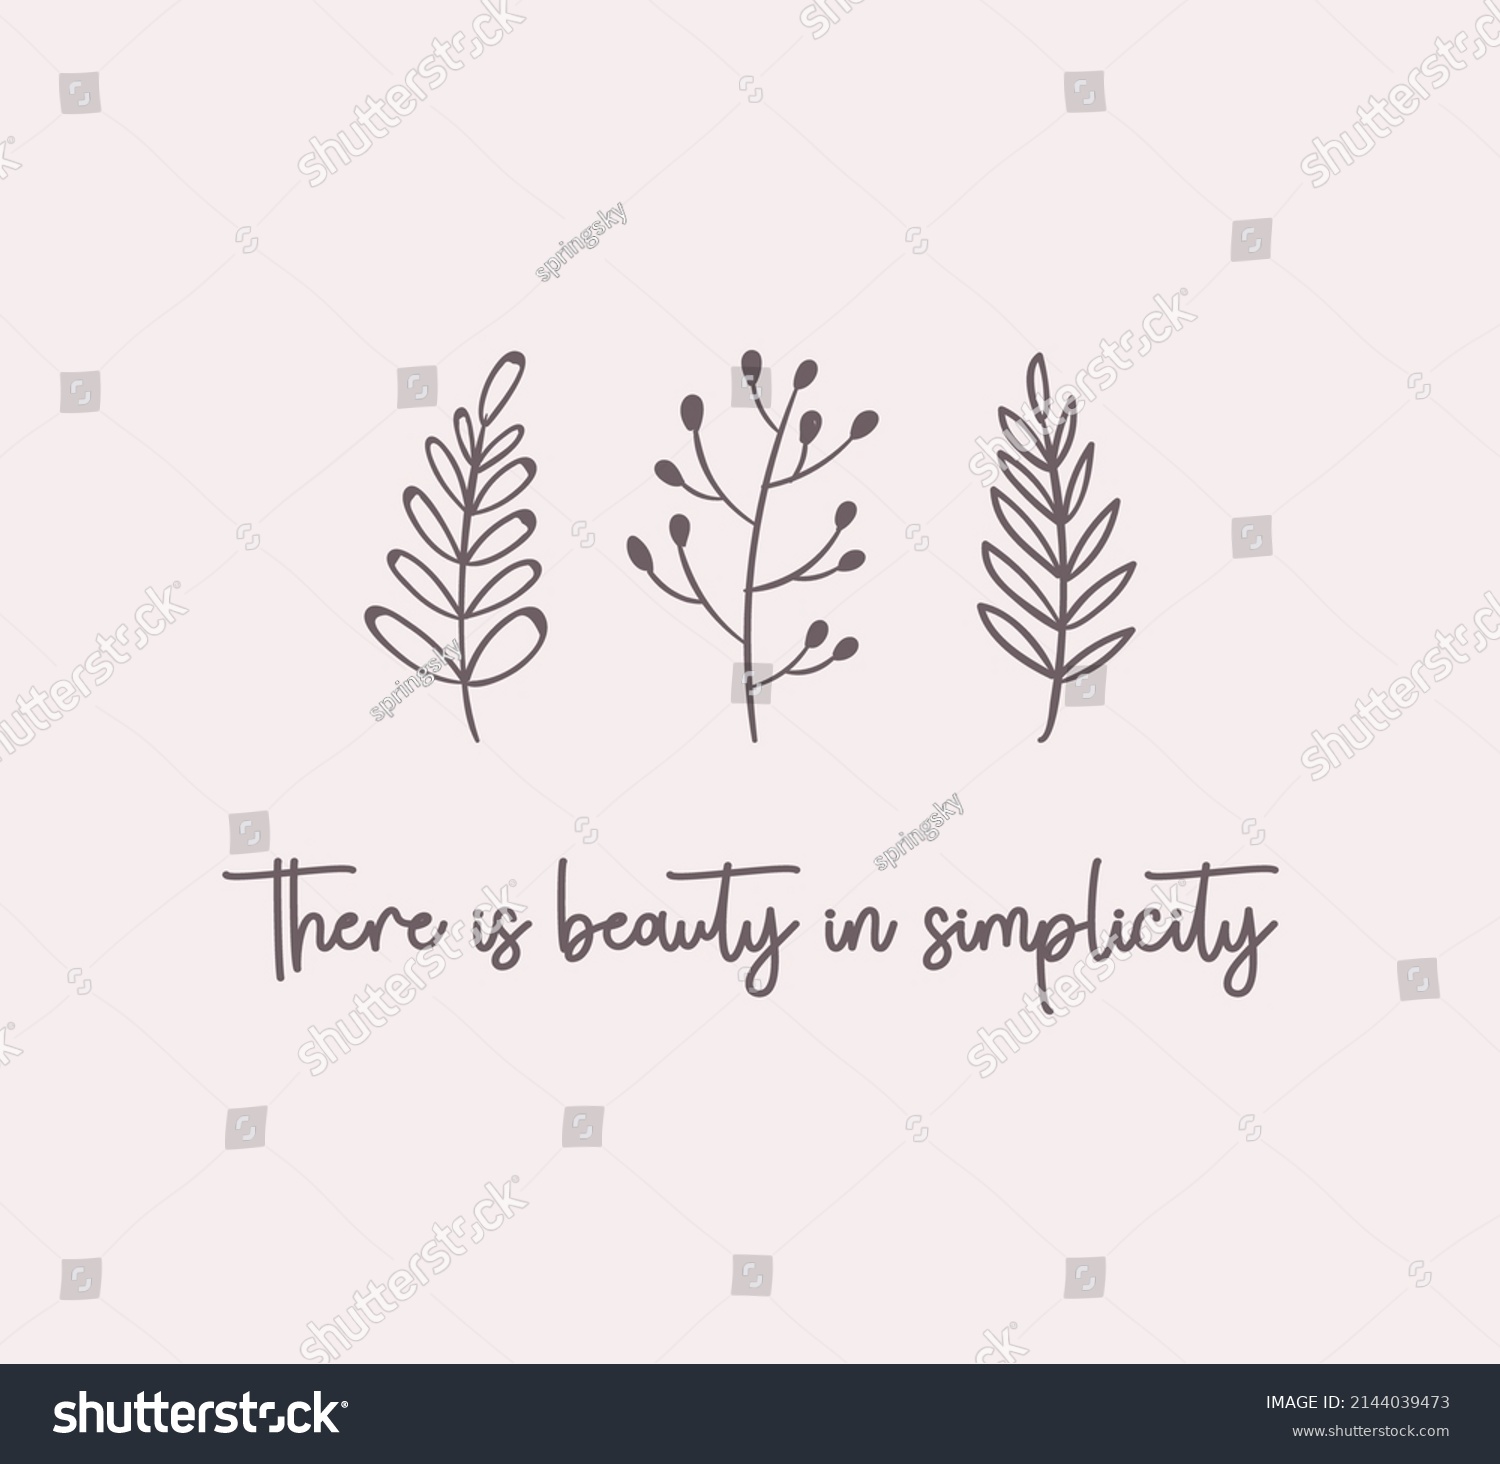 Decorative There is Beauty in Simplicity Slogan with Cute Leaves, Vector Design for Fashion and Poster Prints, Card, Sticker, Wall Art, Positive Quote, Botanical, Leaf, Simple Design #2144039473